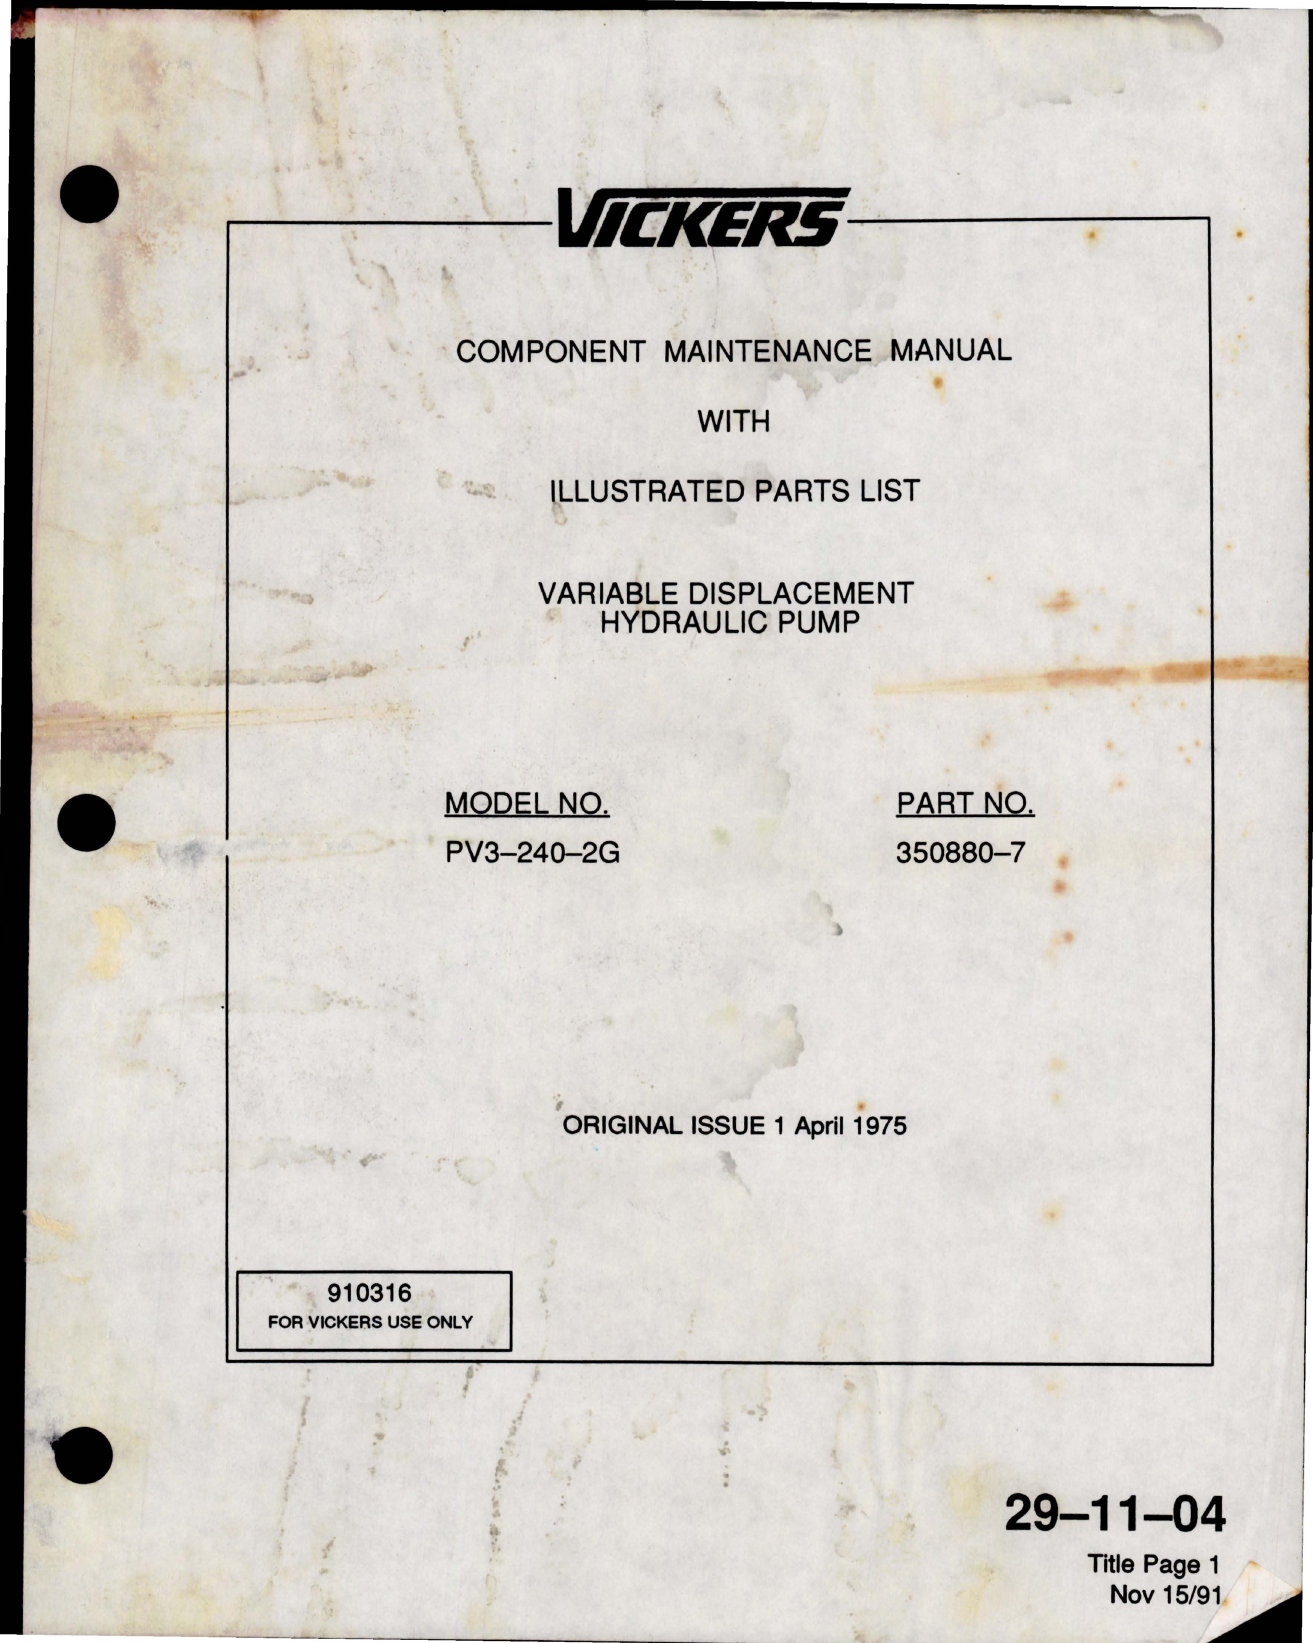 Sample page 1 from AirCorps Library document: Maintenance Manual with Illustrated Parts List for Variable Displacement Hydraulic Pump - Model PV3-240-2G 